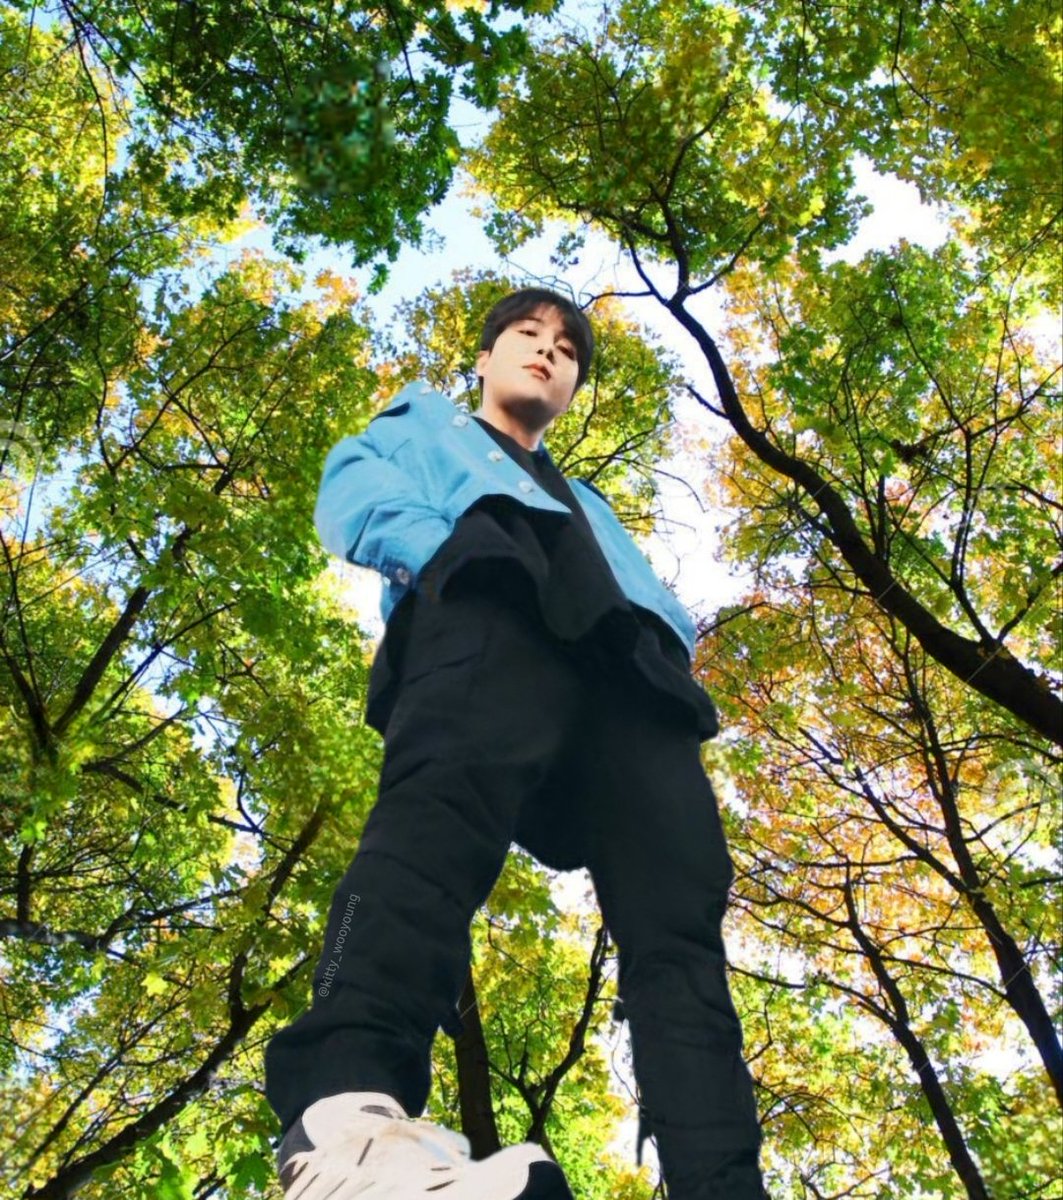 pov you're a bug at a park and jongho is deciding whether or not to step on you